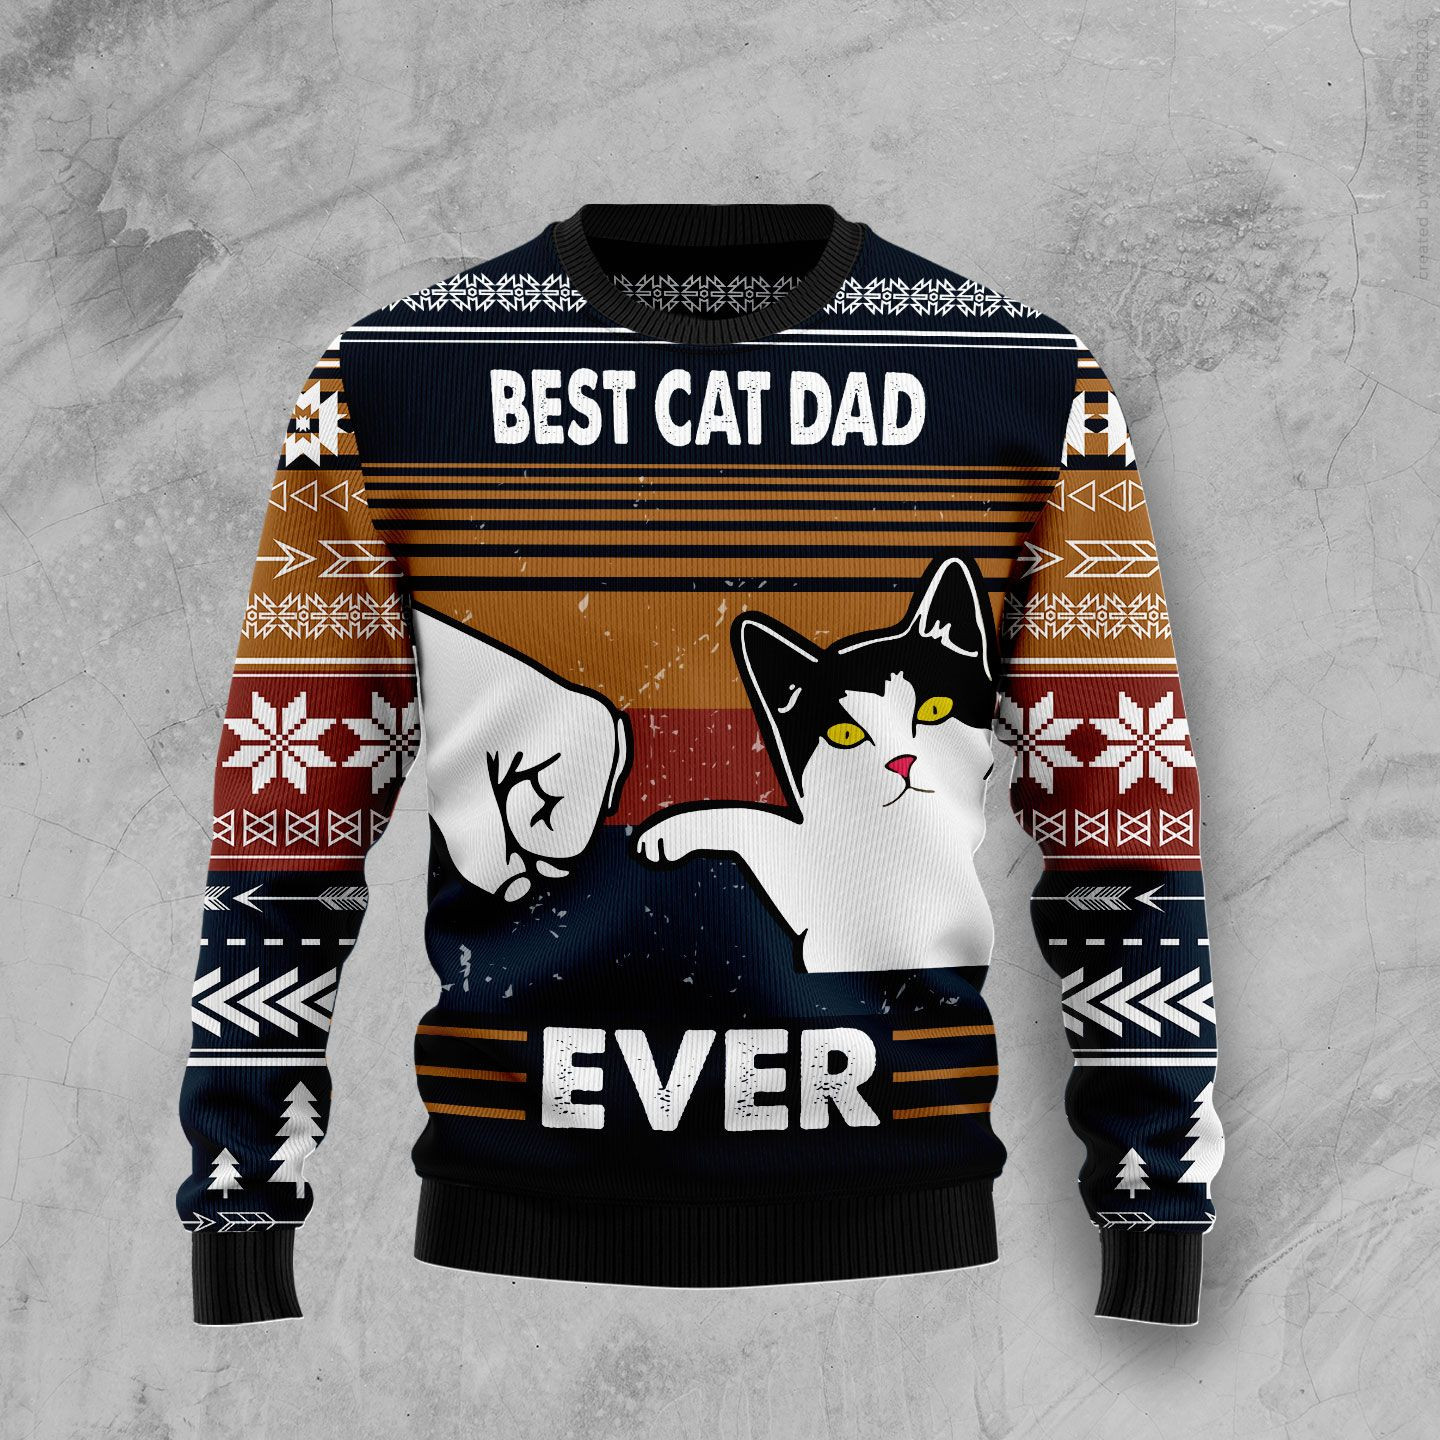 Best Cat Dad Ever Ugly Christmas Sweater, Ugly Sweater For Men Women, Holiday Sweater